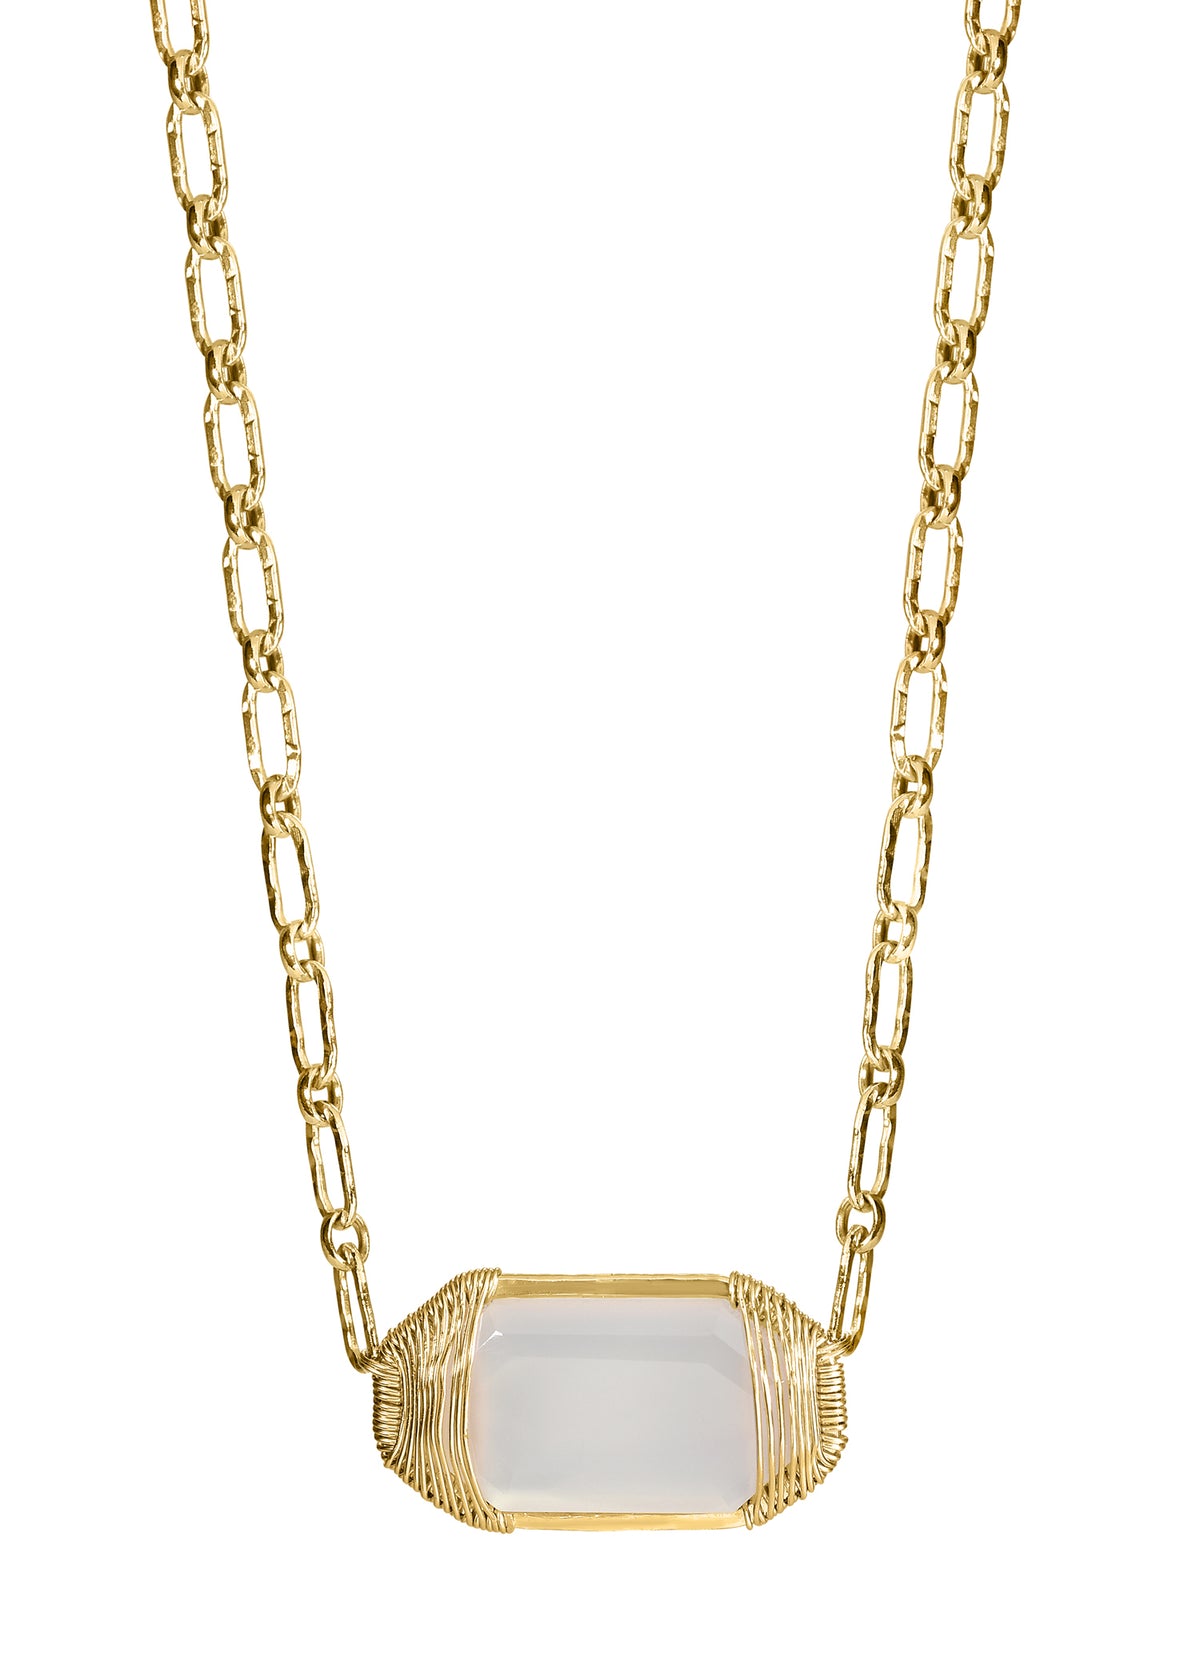 Natural chalcedony 14k gold fill Necklace measures 15-1/2&quot; Pendant measures 1/2&quot; in length and 13/16&quot; in width Handmade in our Los Angeles studio